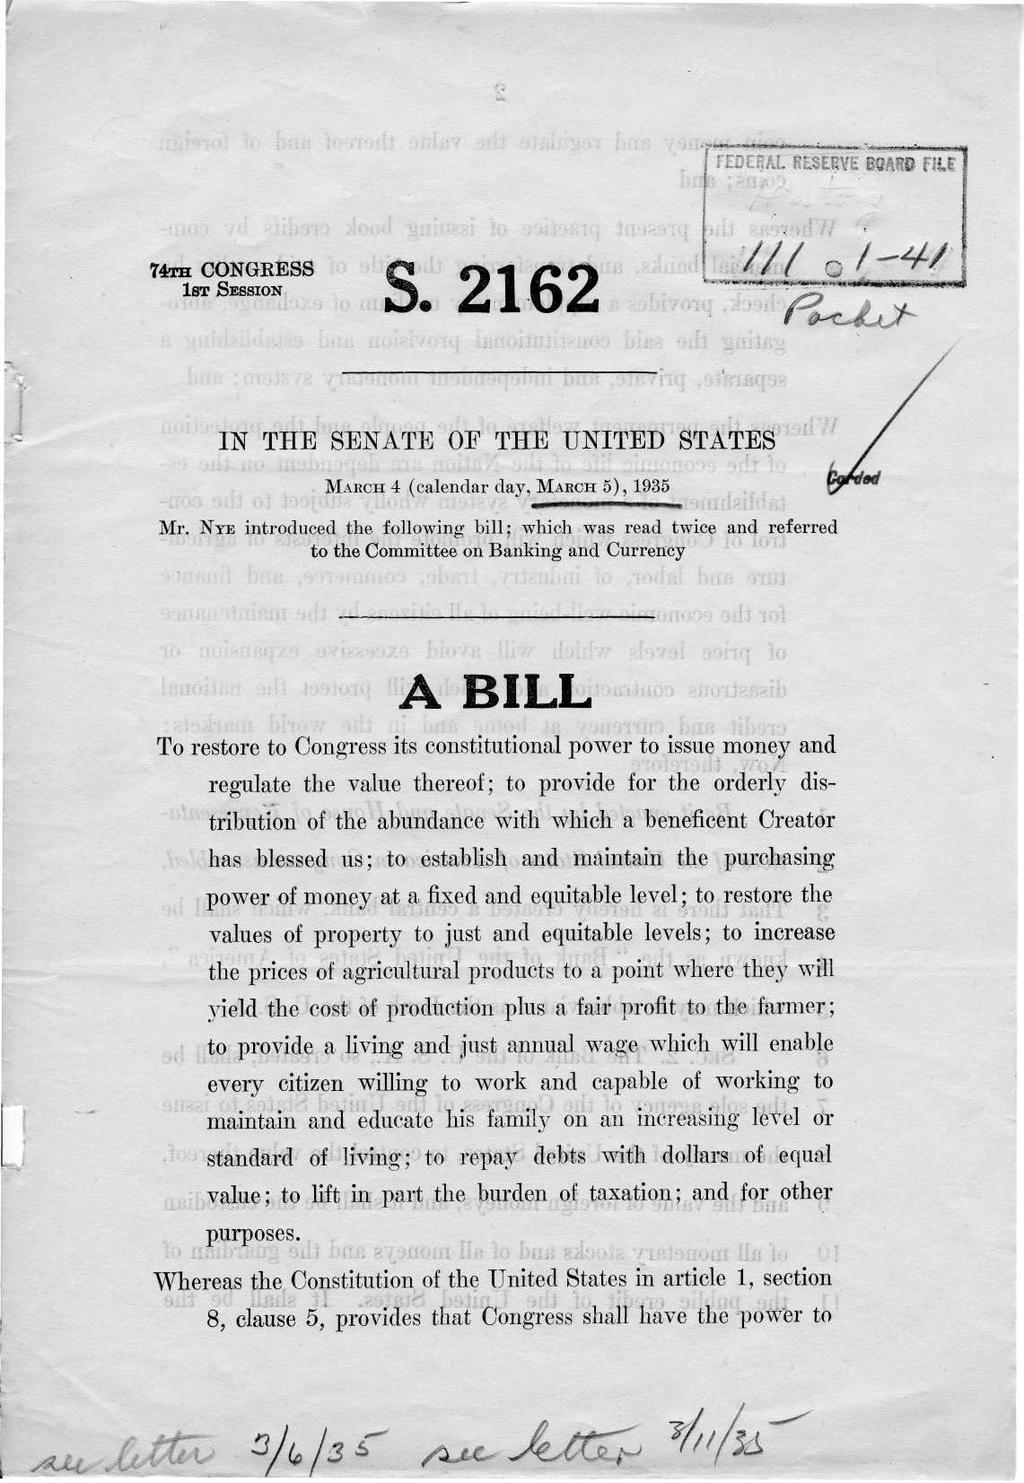 74TH CONGRESS 1ST SESSION S. 2162 IN.THE SENATE OF THE UNITED STATES MARCH 4 (calendar day, MARCH 5), 1935 Mr.